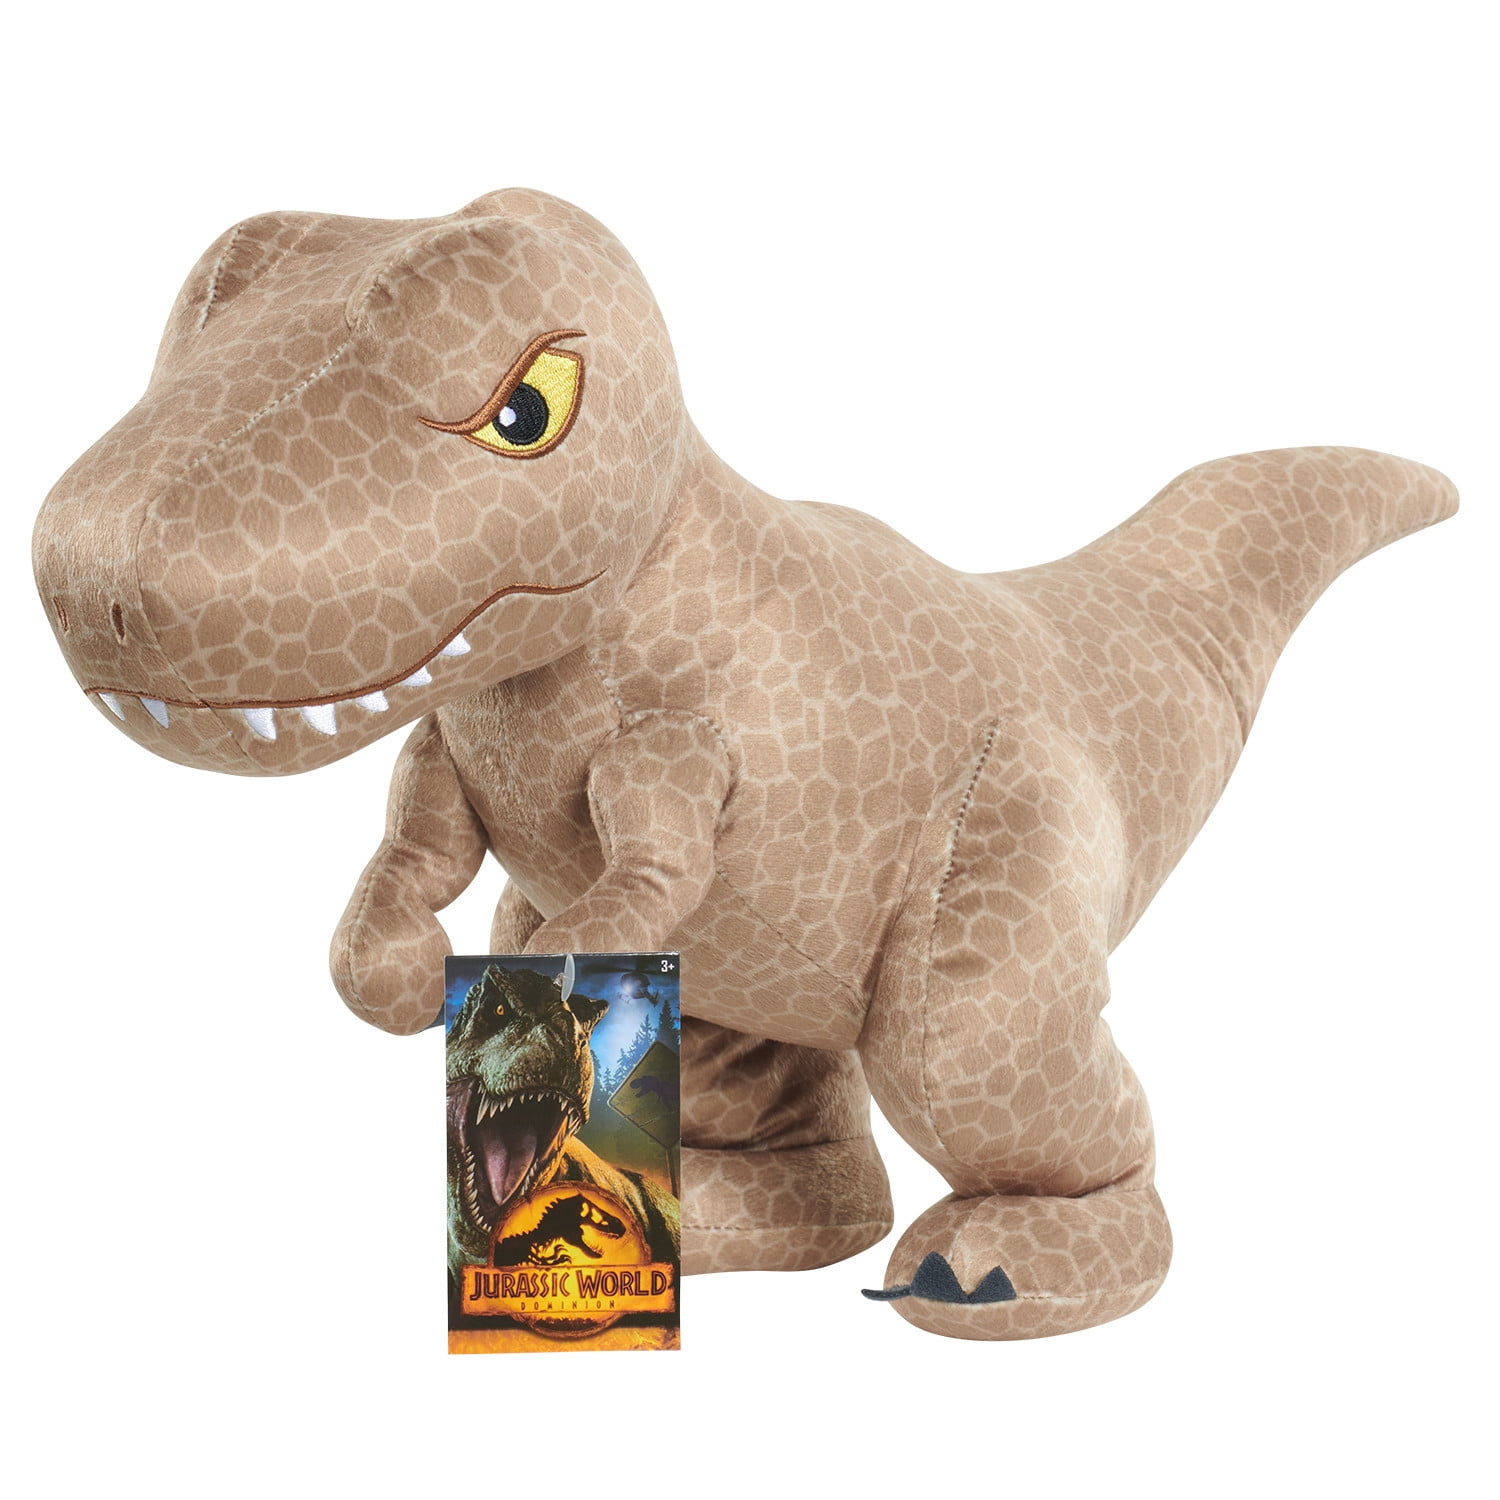 Jurassic World Large 12-inch Tyrannosaurus Rex Plush Stuffed Animal,  Kids Toys for Ages 3 Up, Gifts and Presents